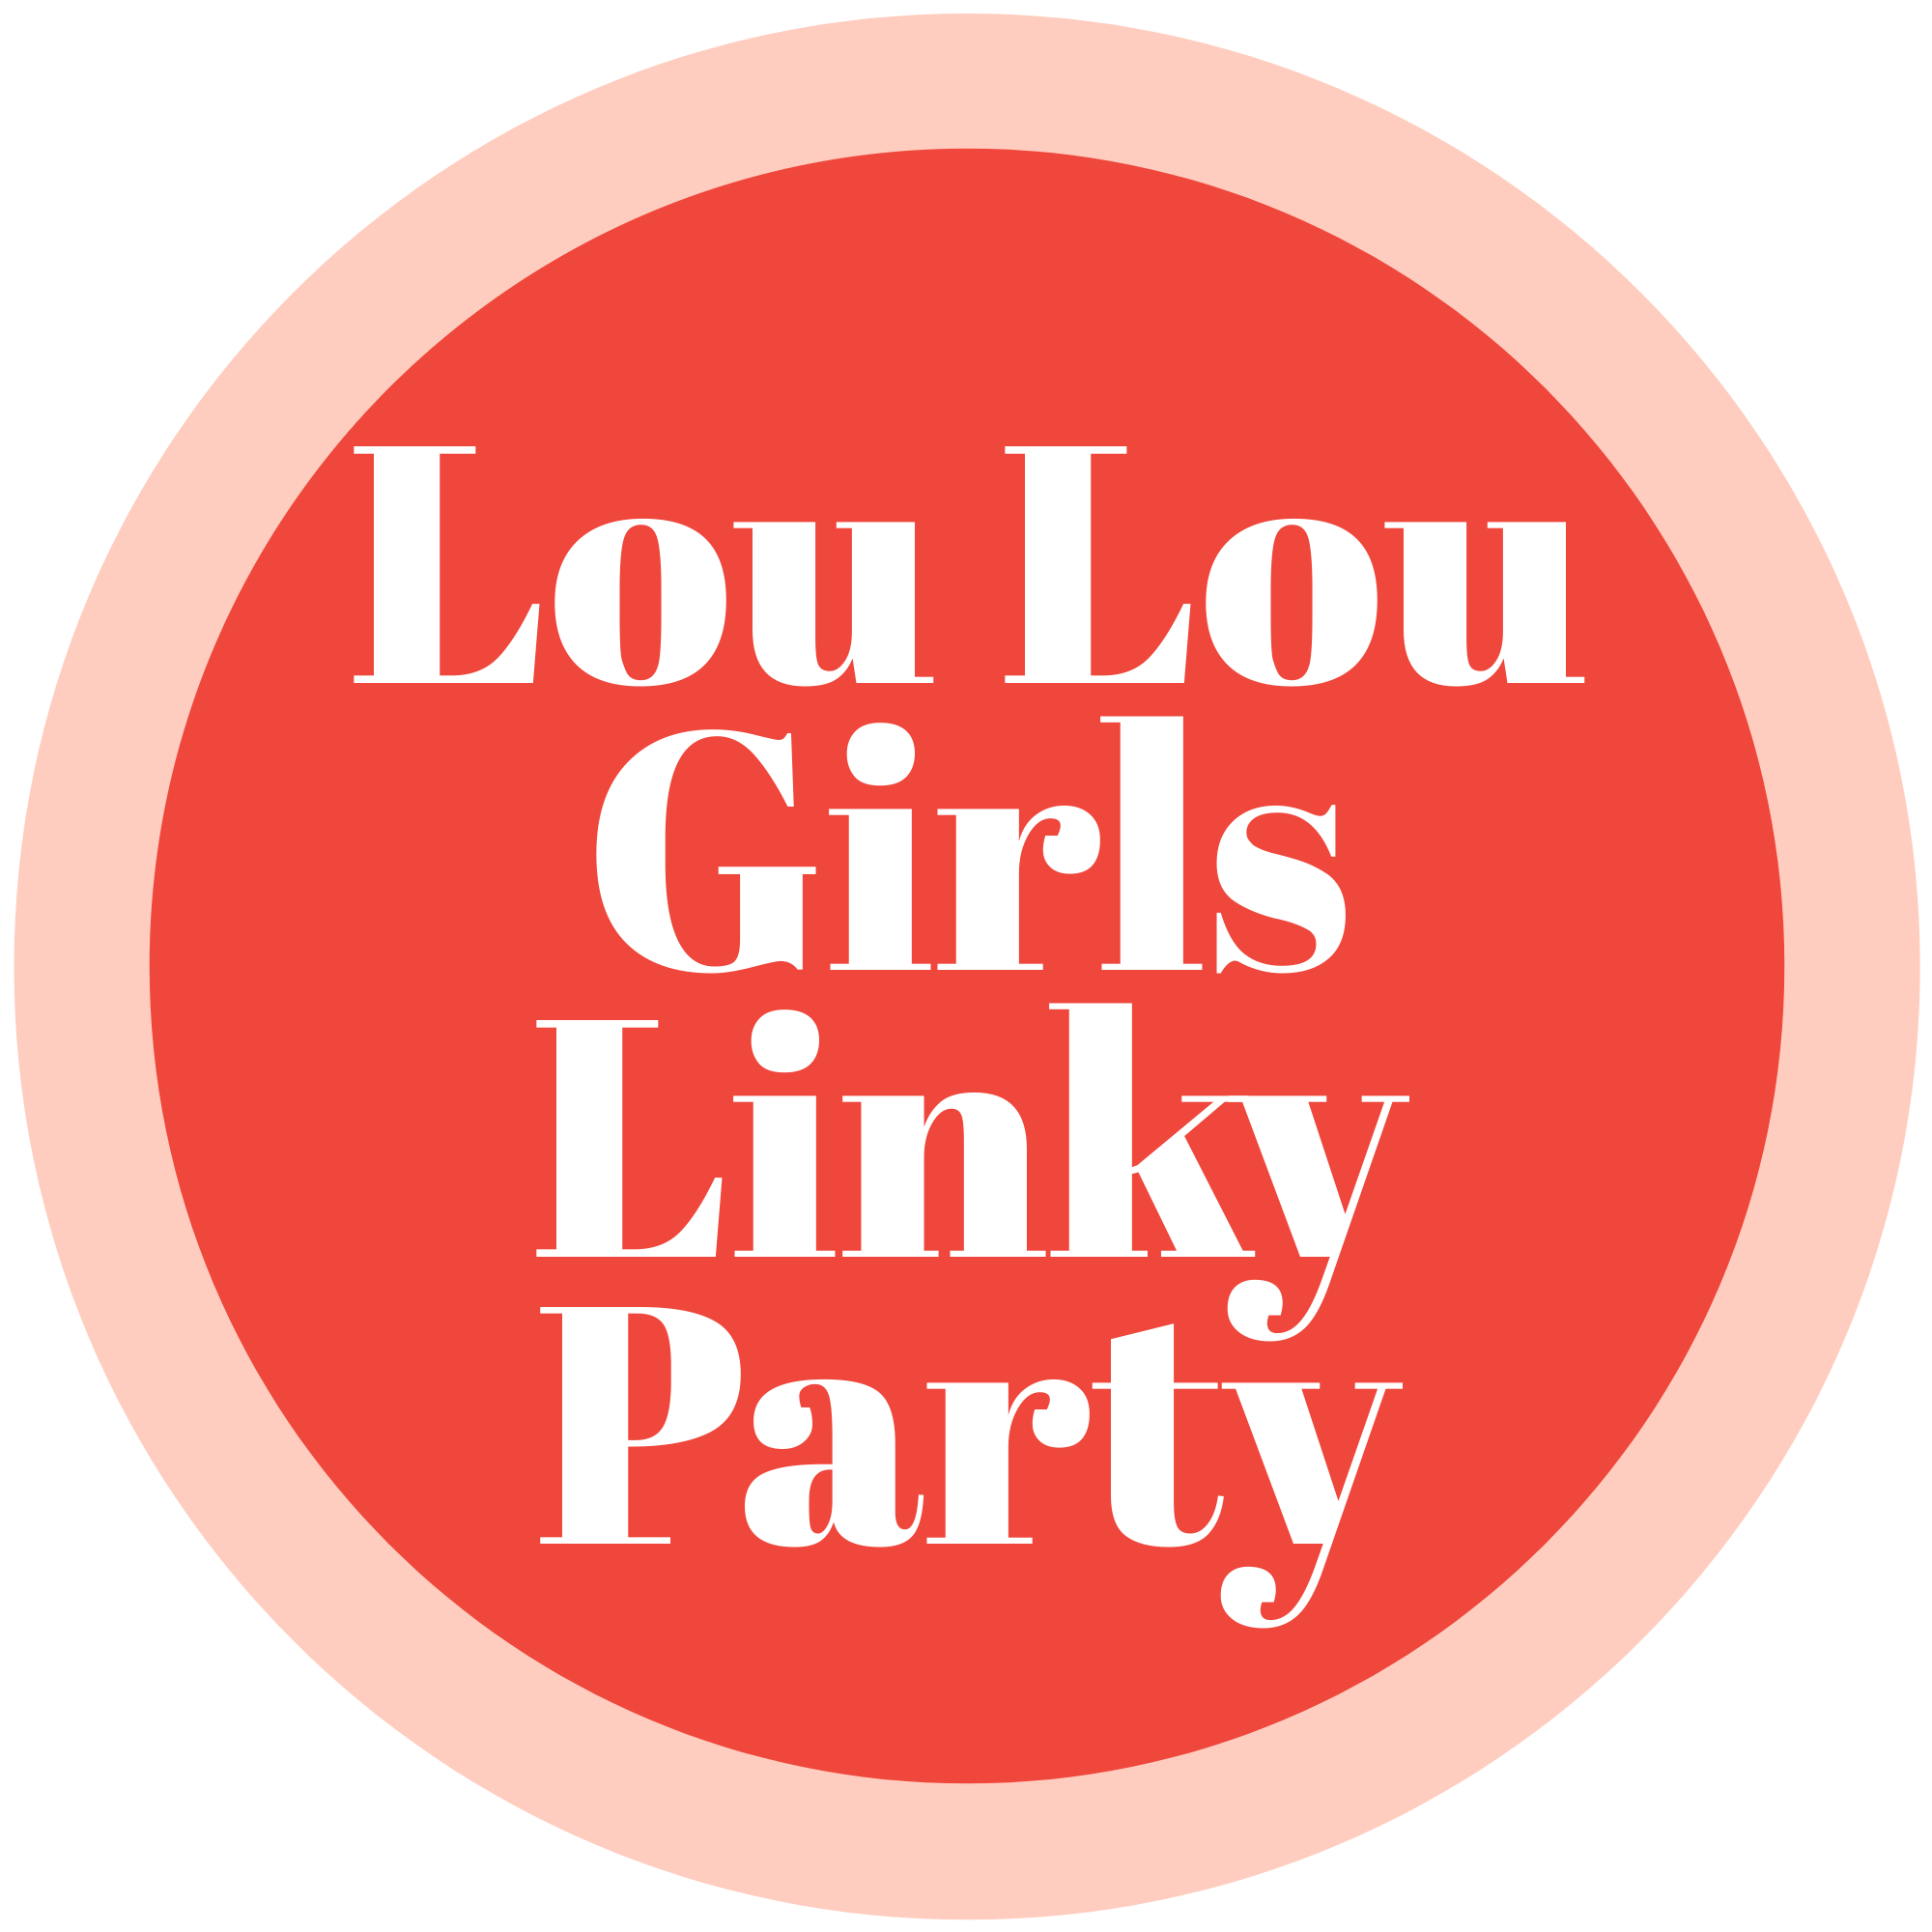 Lou Lou Girls Fabulous Party 503 #linkyparty #bloghop #linkyparties